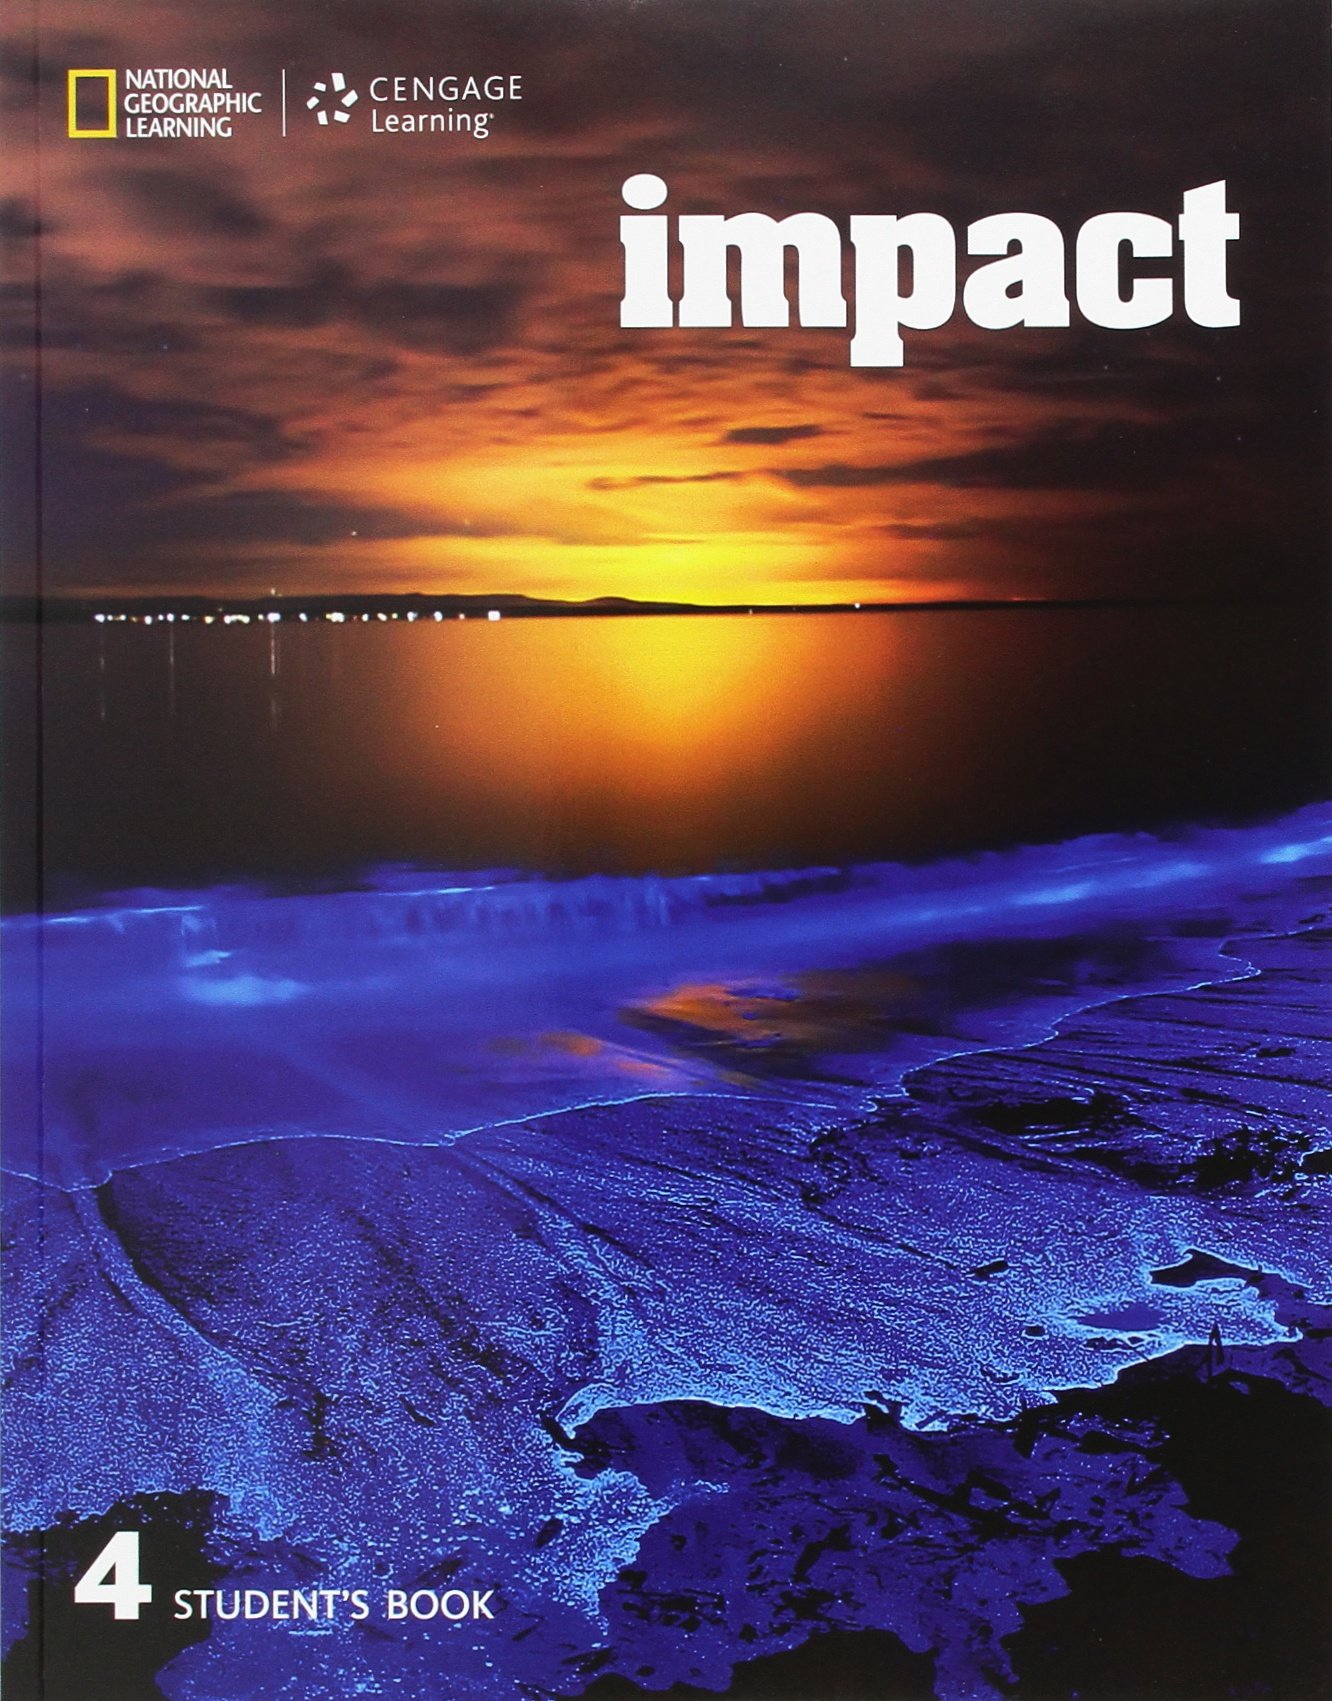 IMPACT 4 Student's Book + Online Workbook Printed Access Code